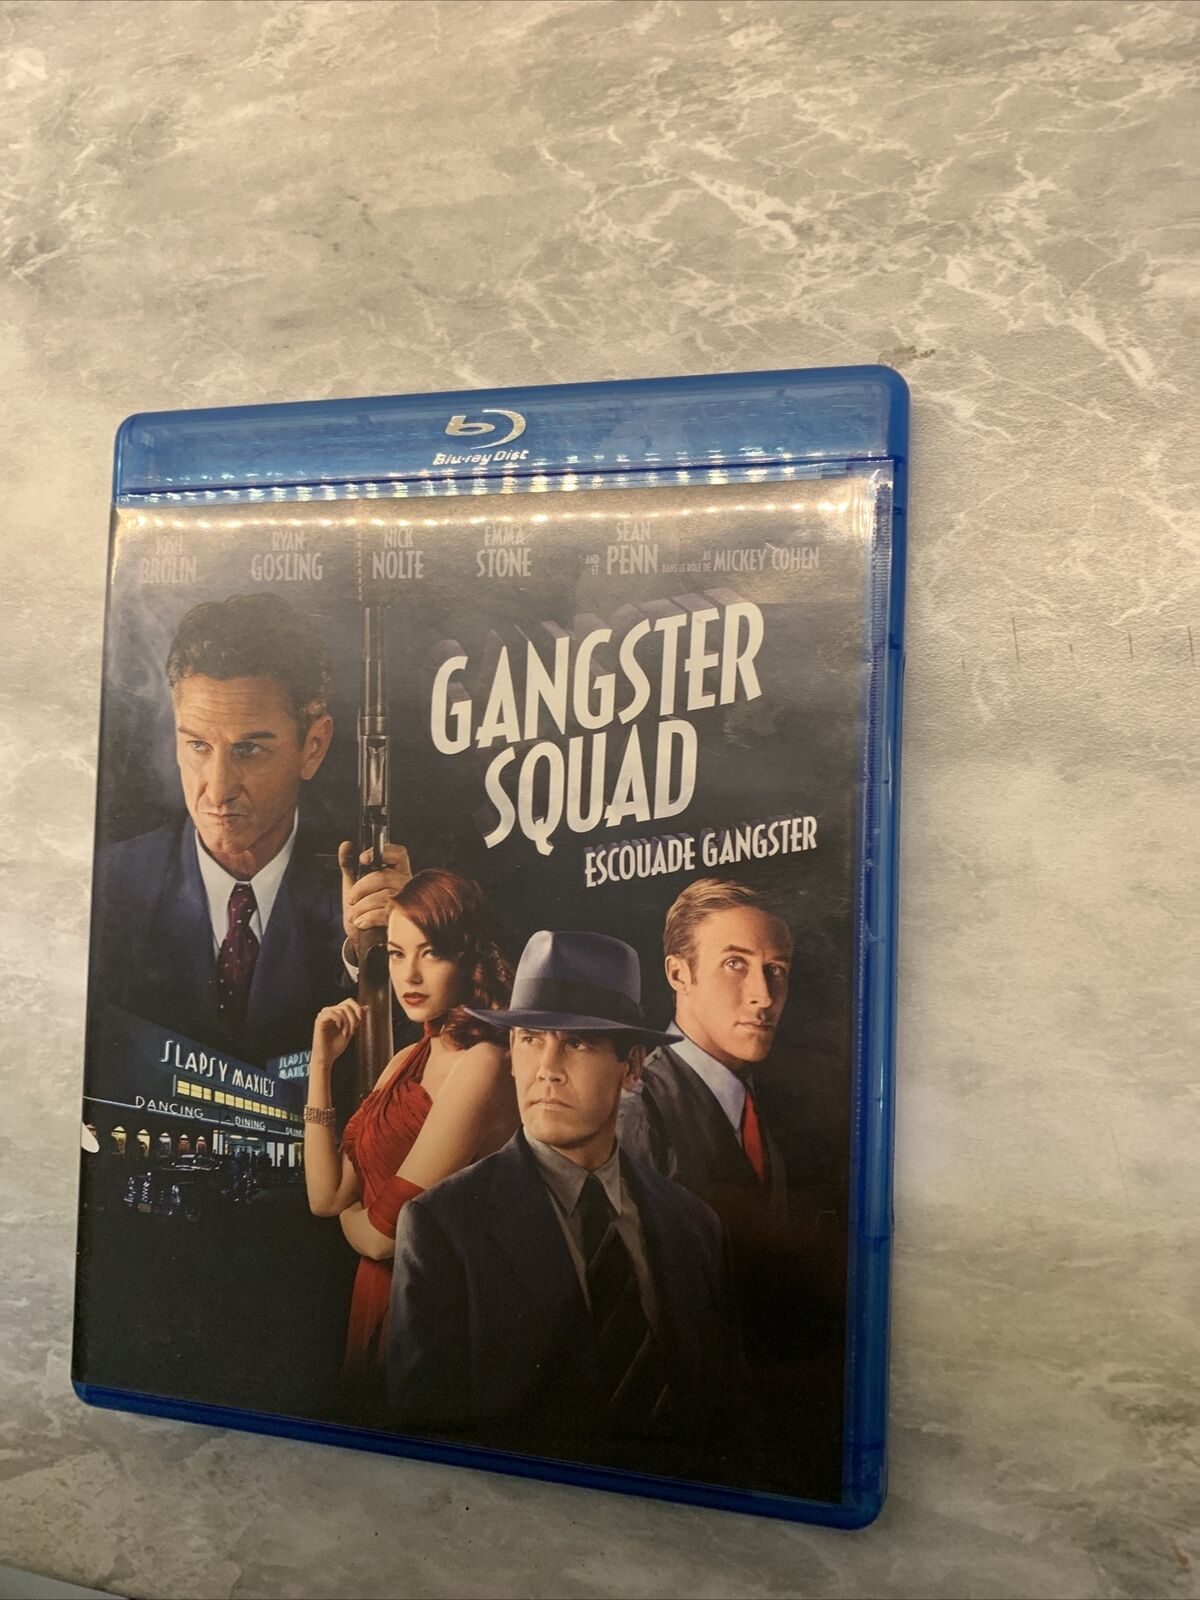 Gangster Squad (Blu-ray Disc, 2013, Canadian)